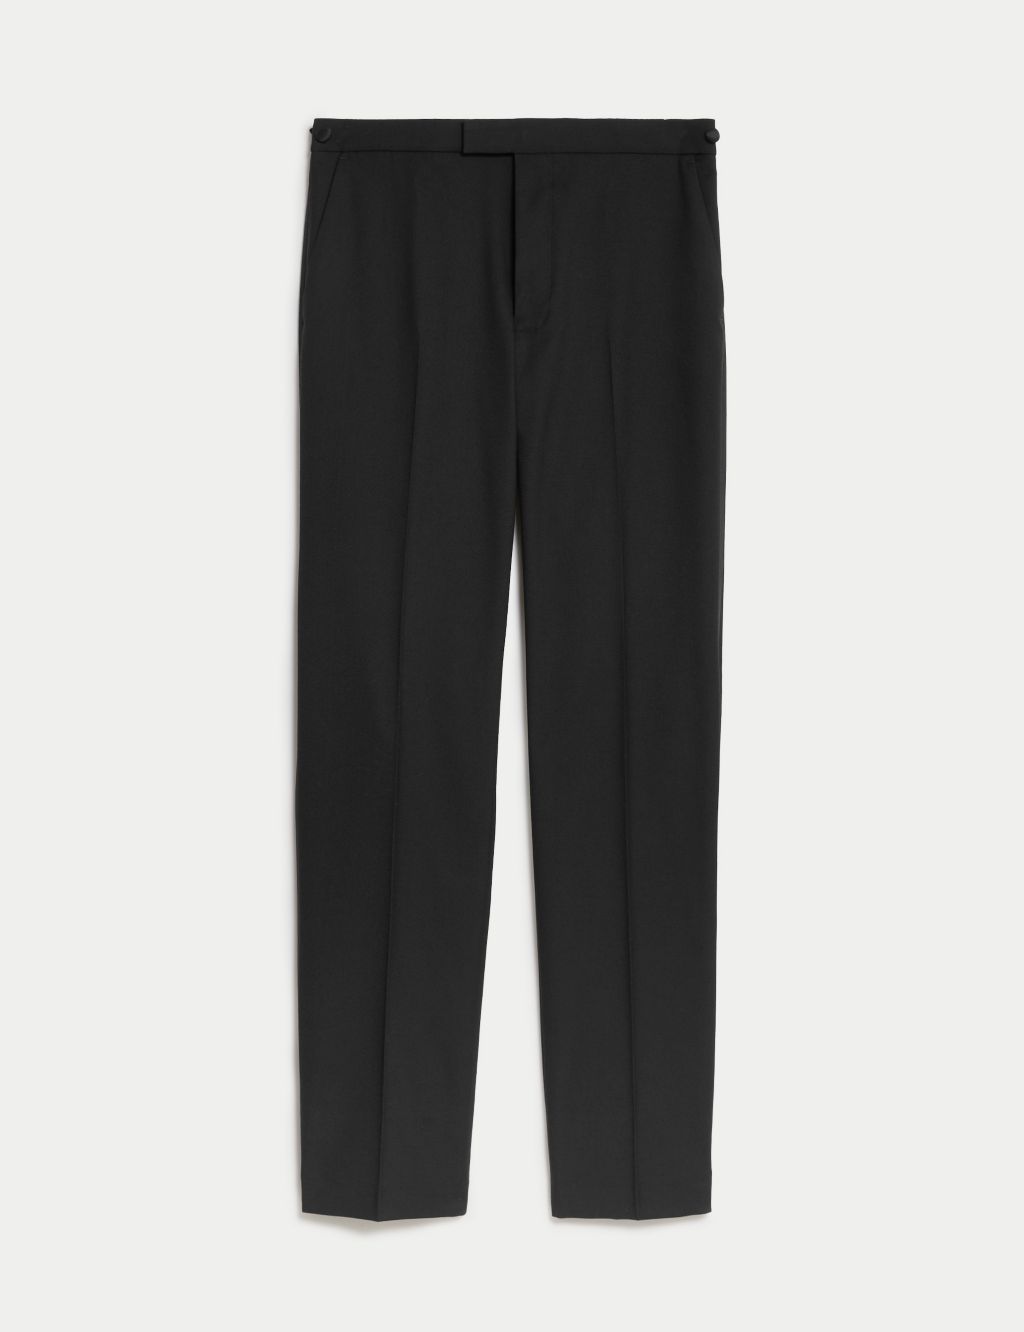 Regular Fit Stretch Tuxedo Trousers | M&S Collection | M&S